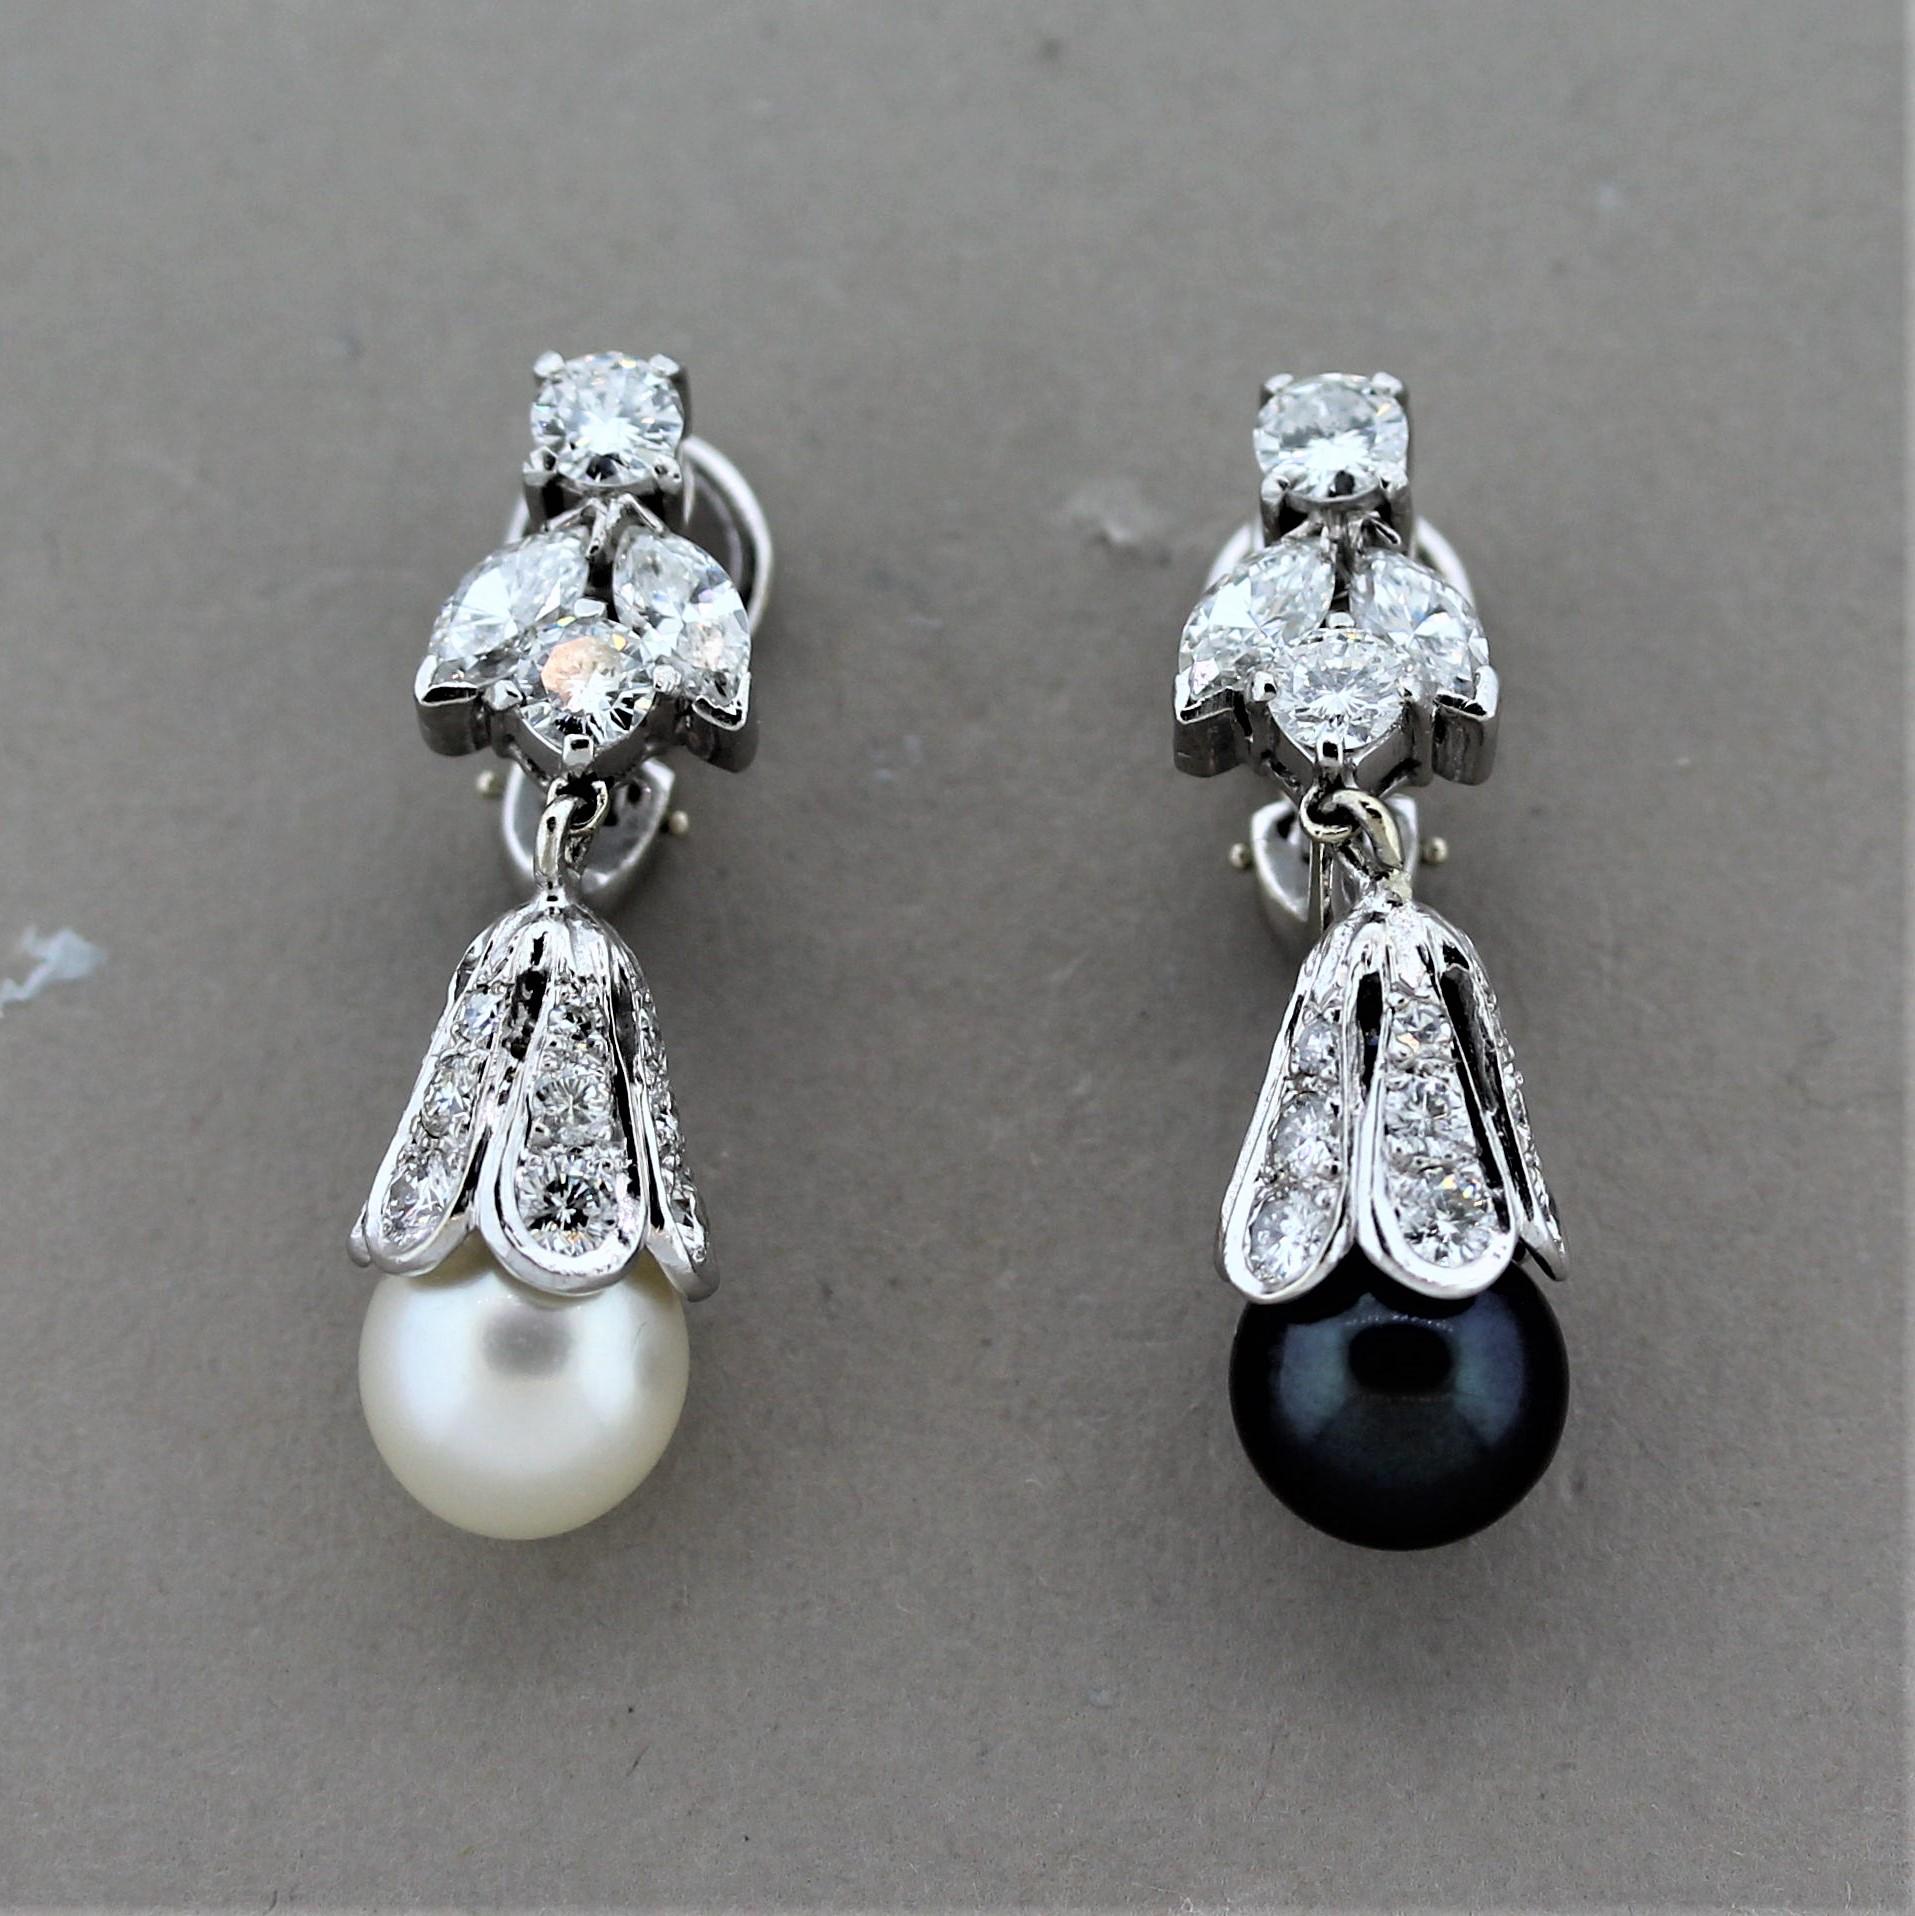 A pair of dazzling platinum mid-century earrings from the 1940’s. They feature two lovely pearls, one white and the other is black with a purple pistachio overtone. They are complemented by 2.50 carats of round brilliant-cut diamonds as well as